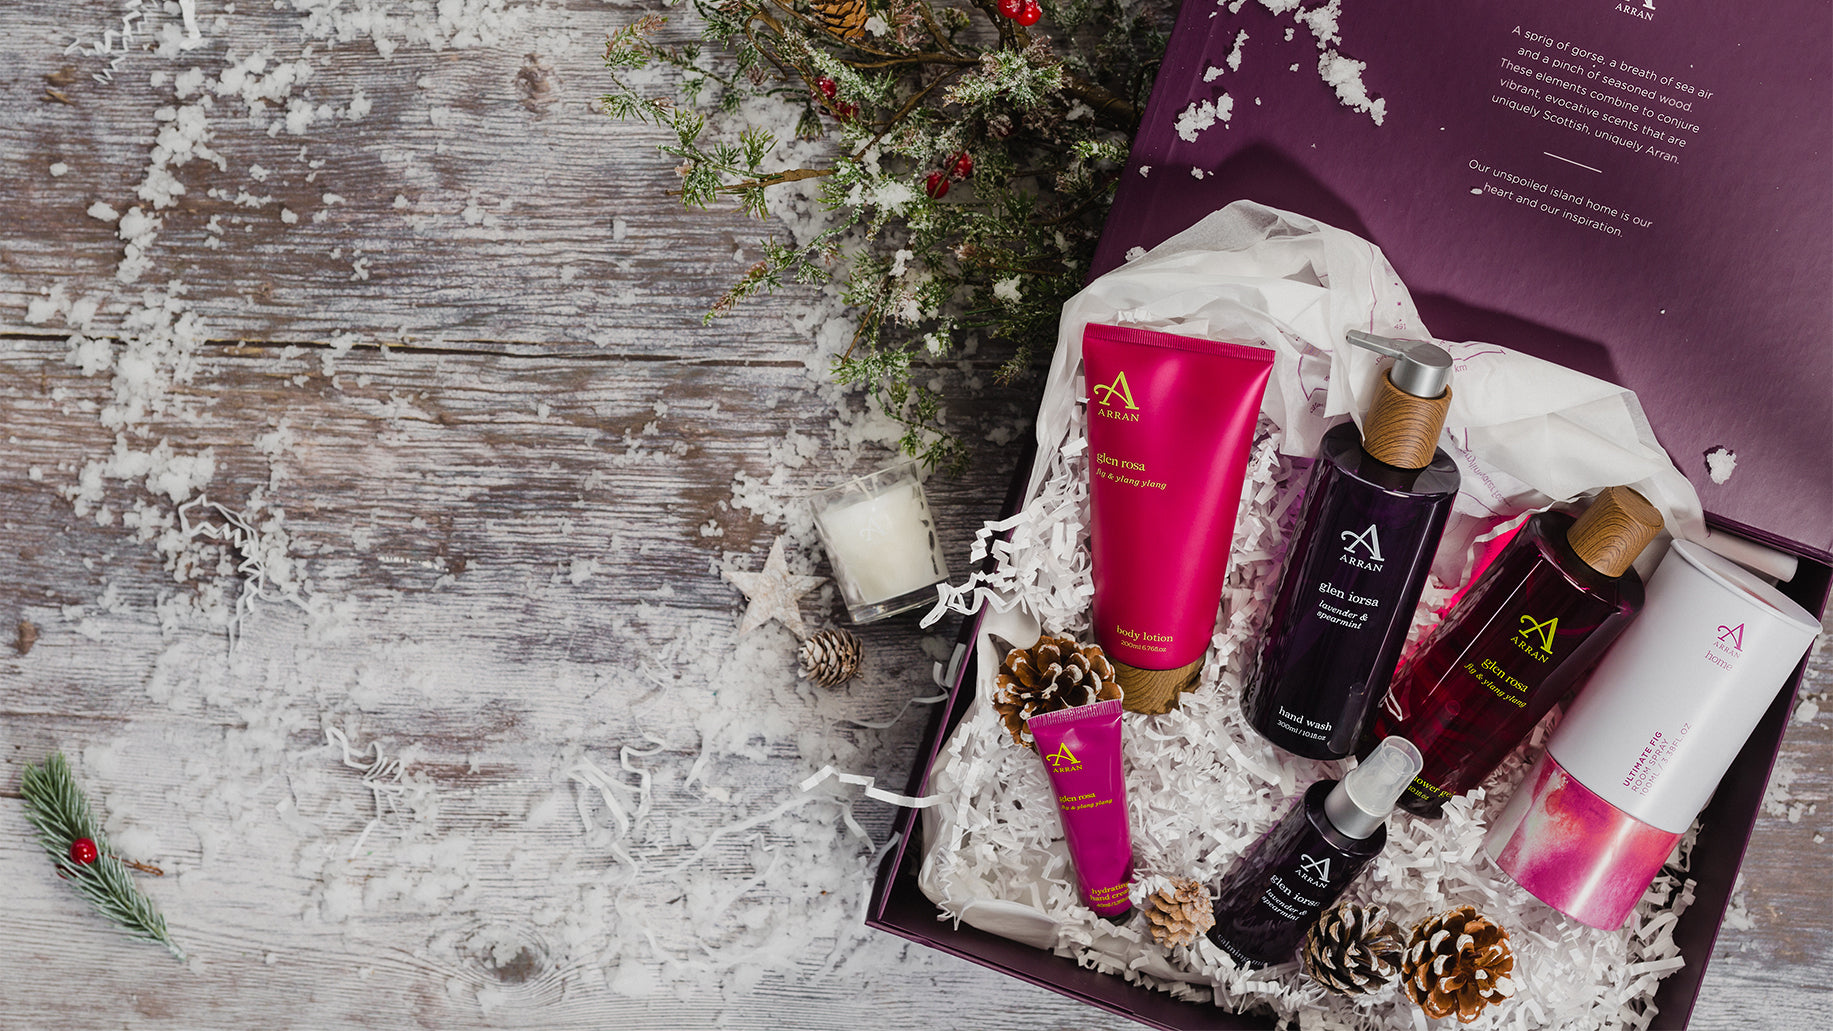 Glen Rosa & Ultimate Fig products in purple gift box, ready to be gifted for Christmas